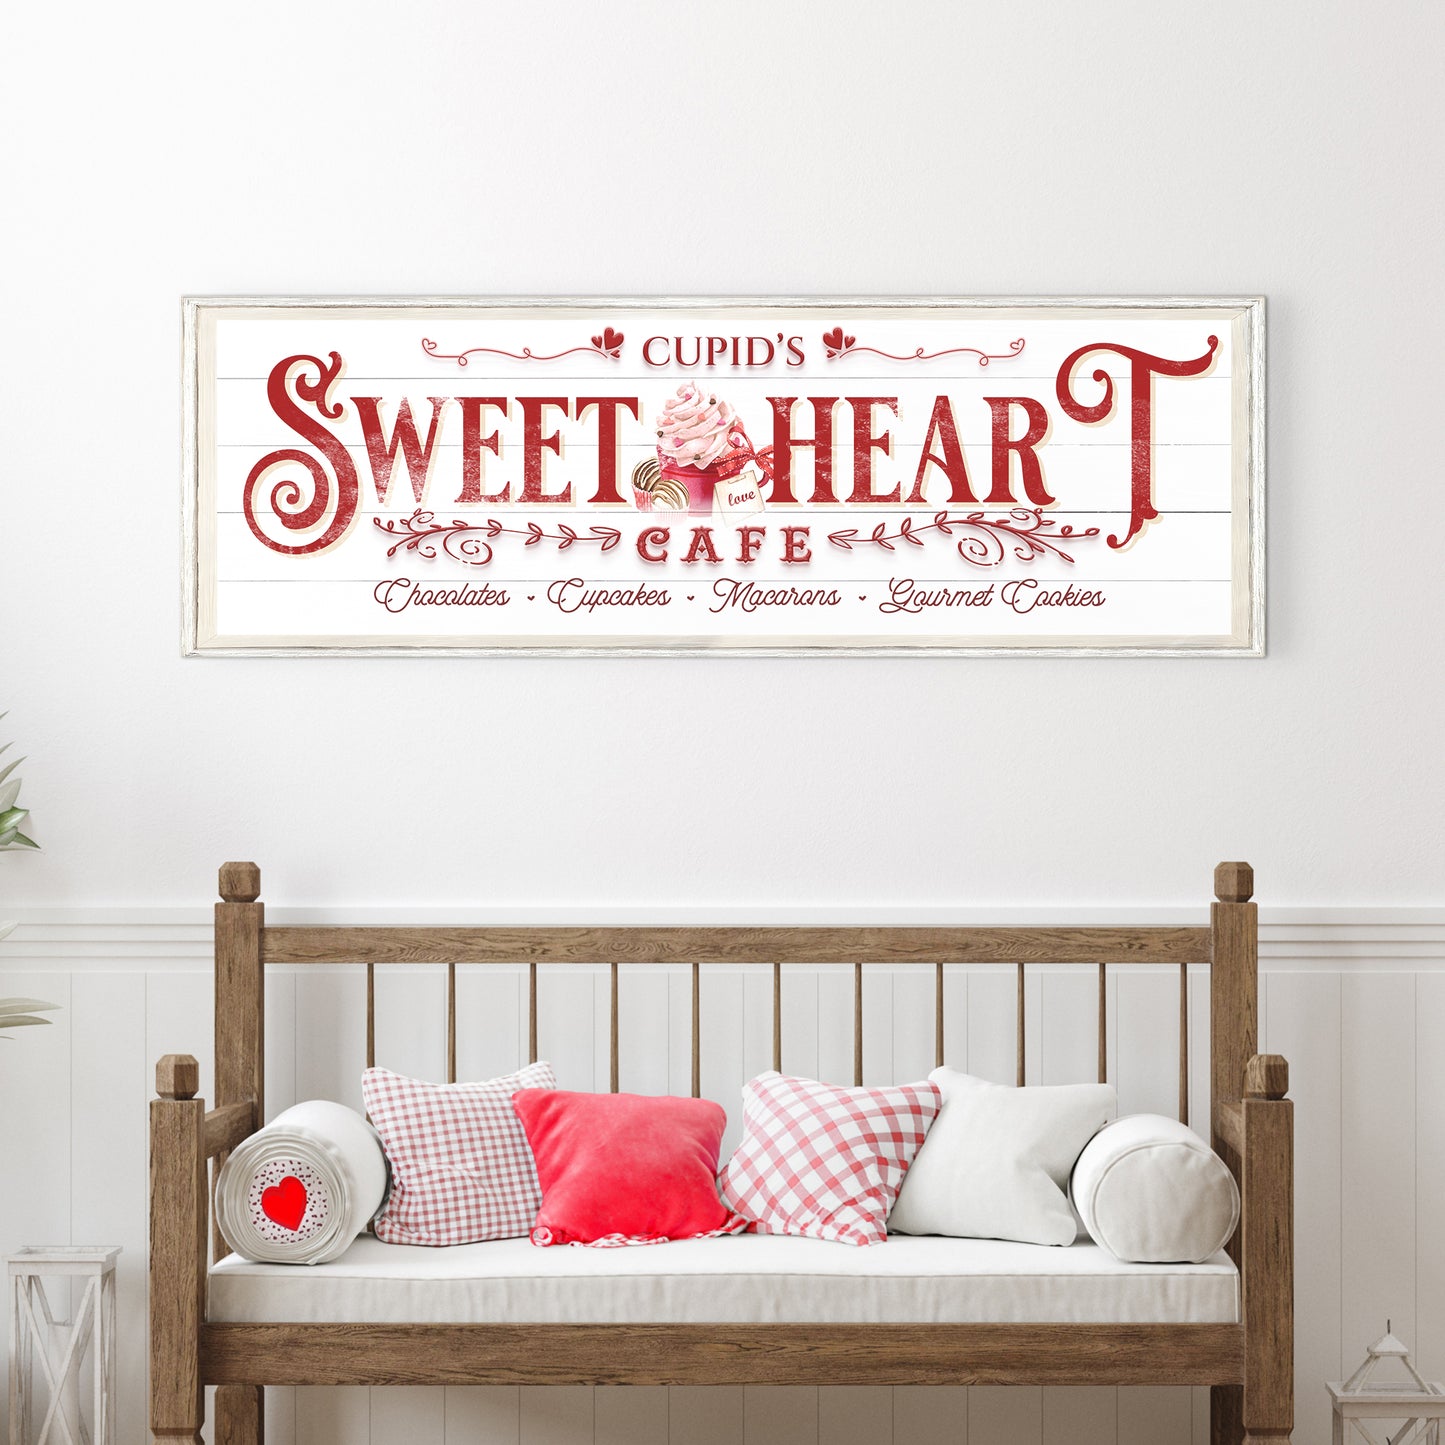 Sweetheart Cafe Sign Style 1 - Image by Tailored Canvases